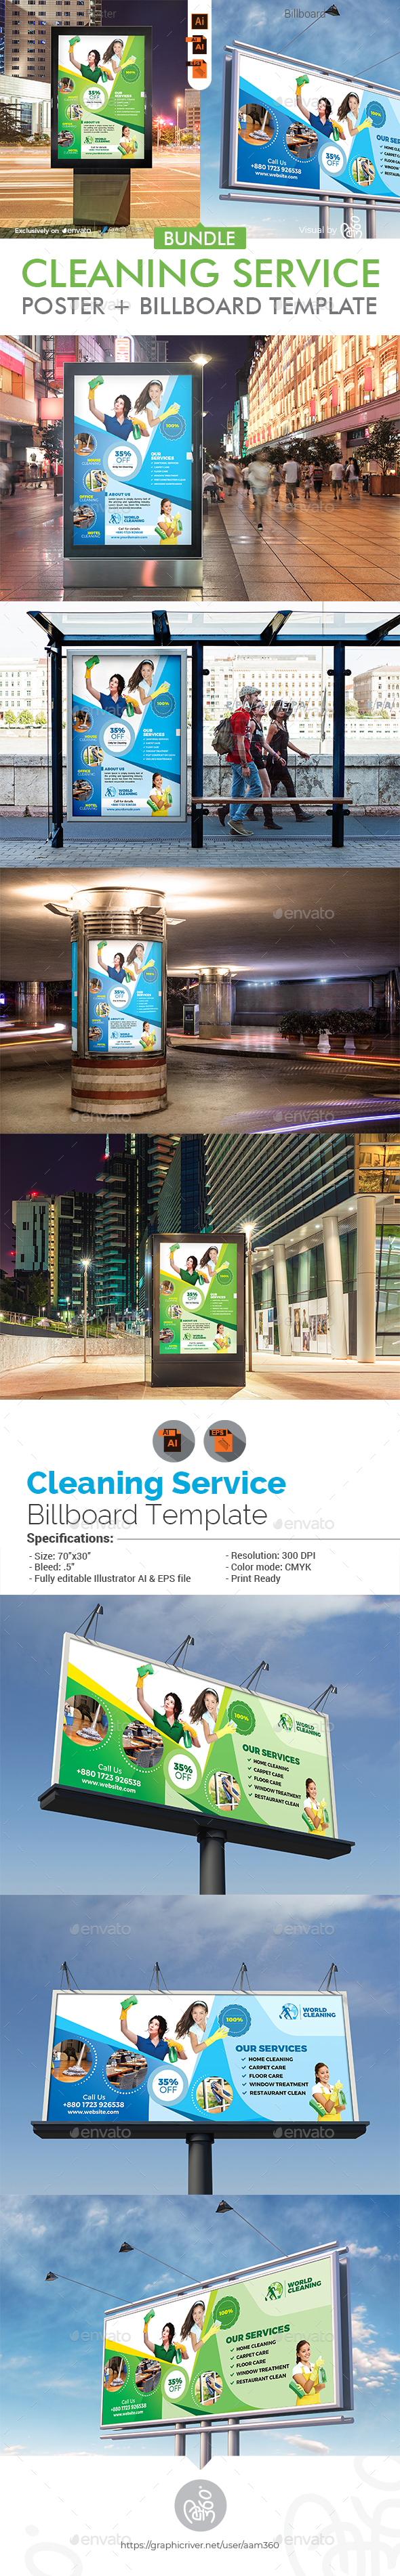 Cleaning Services Poster + Billboard Bundle